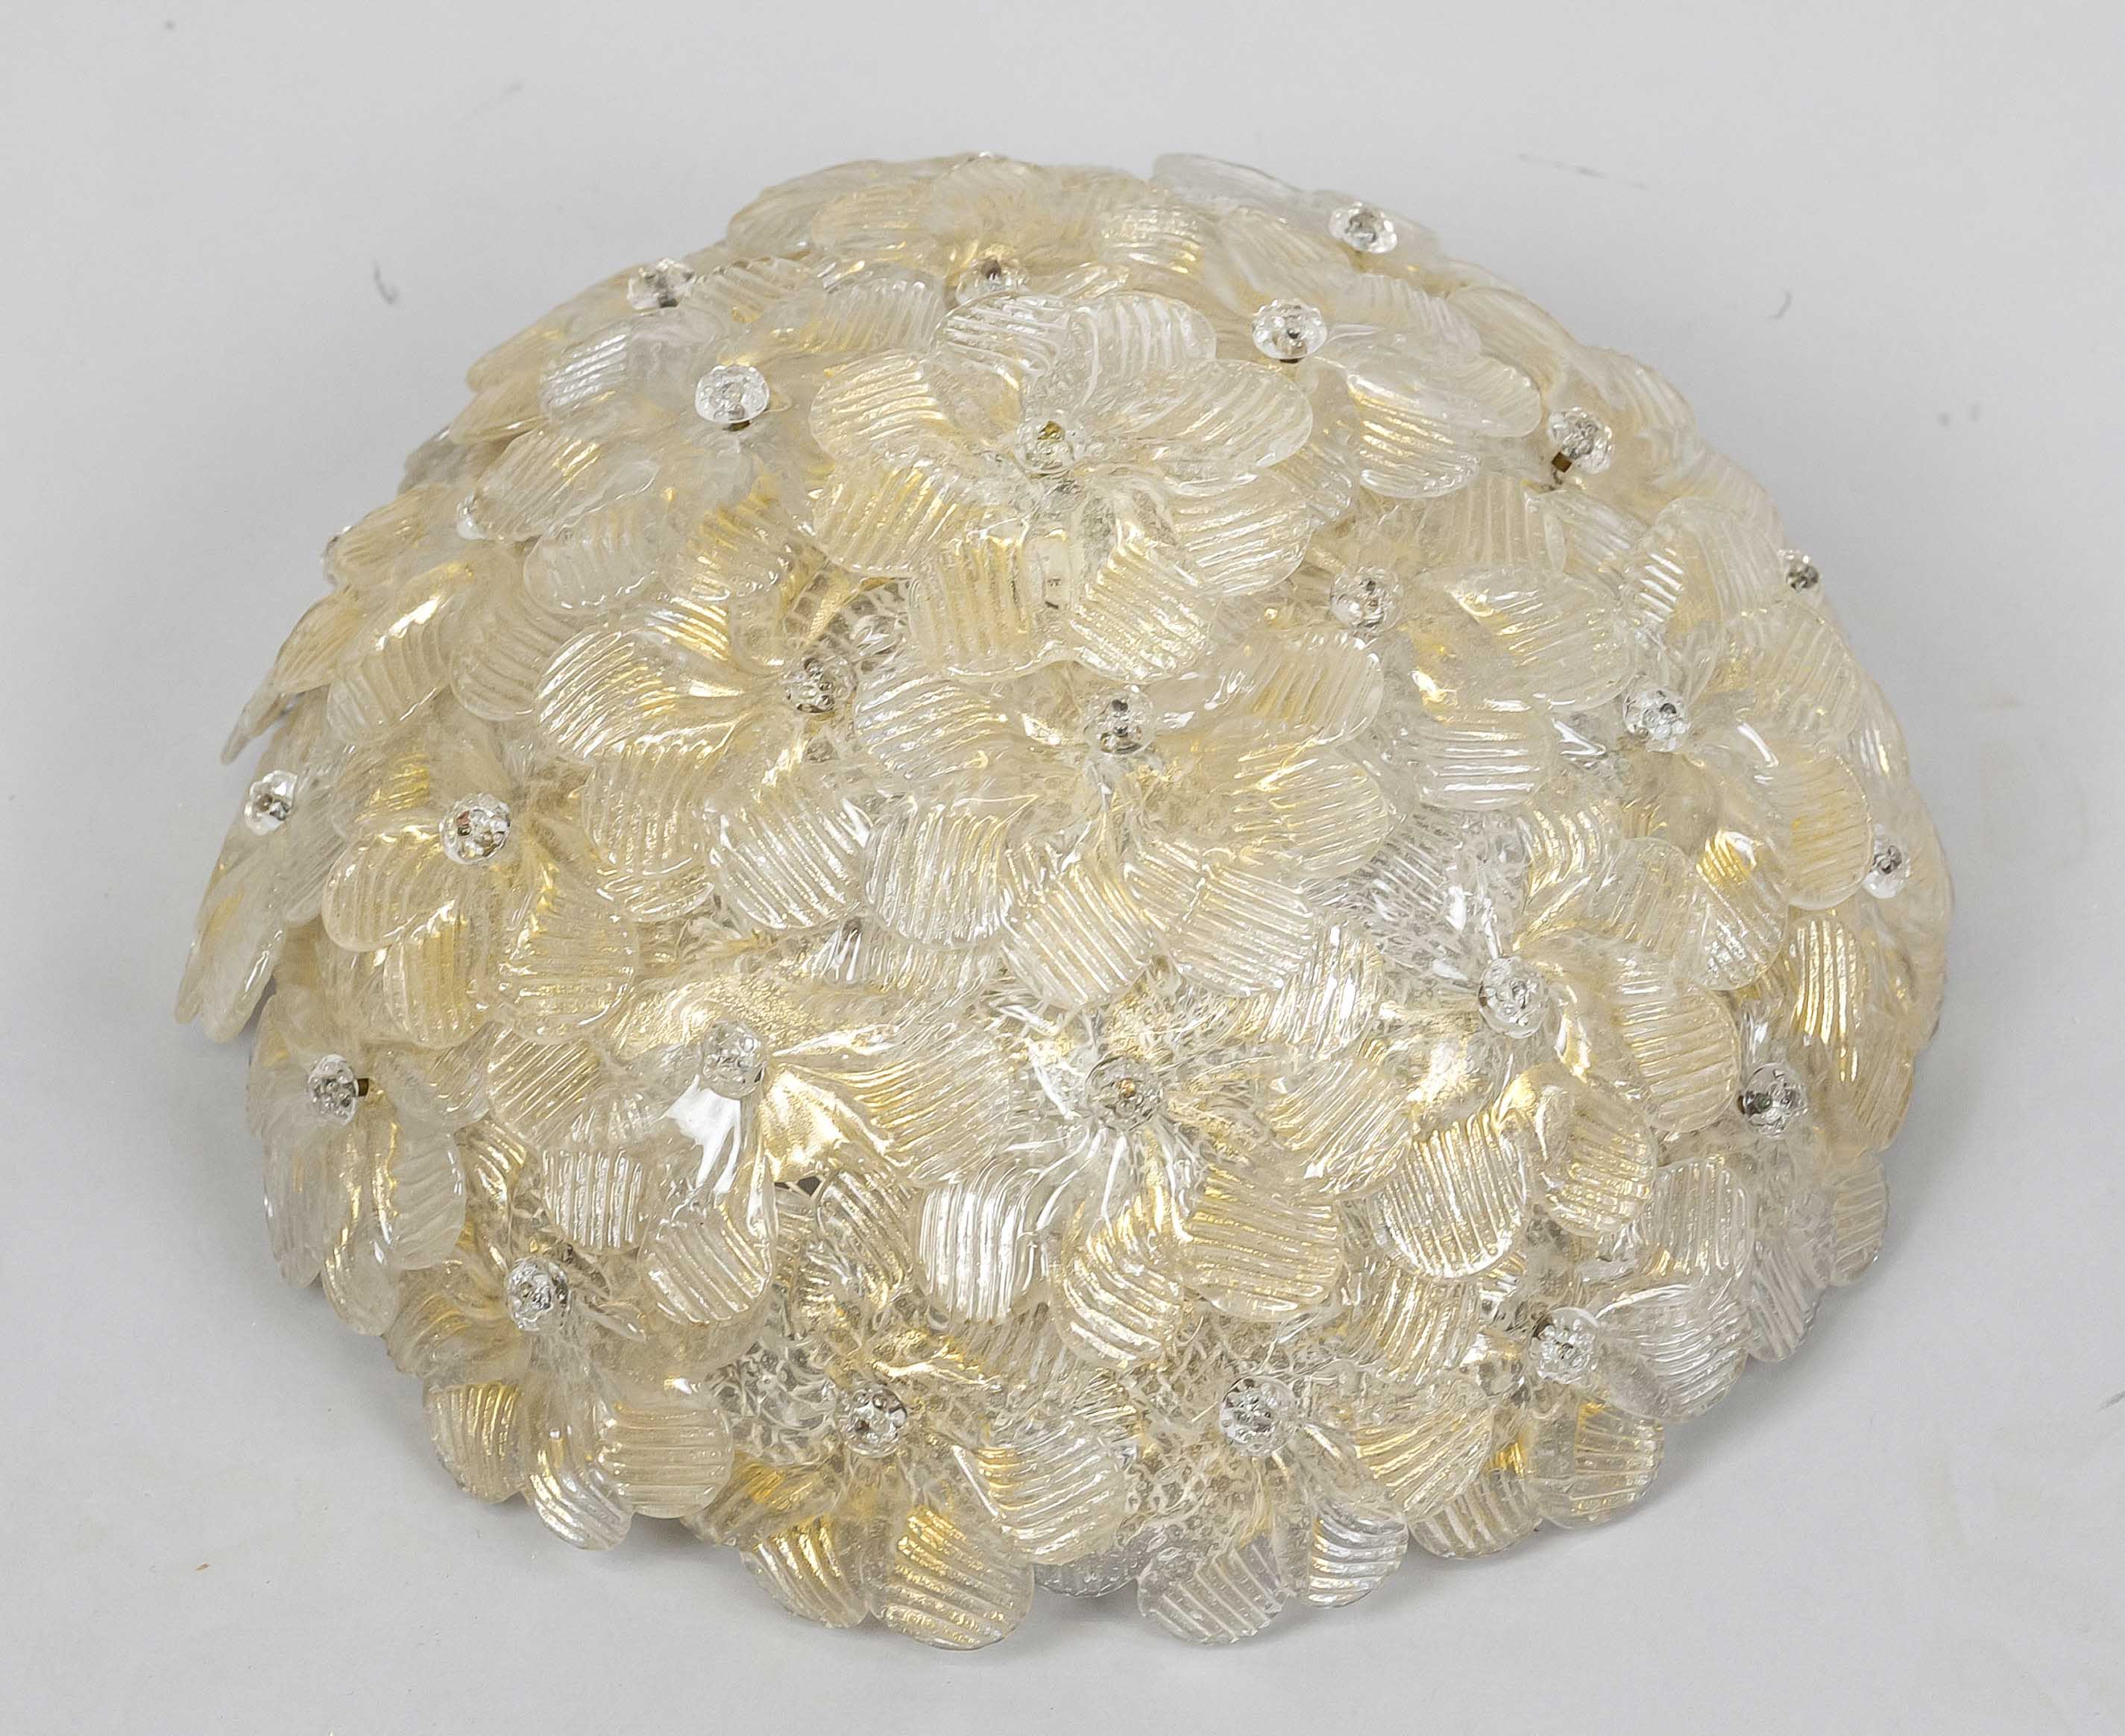 Plafonds with glass flowers, 20th century, d. 28 cm